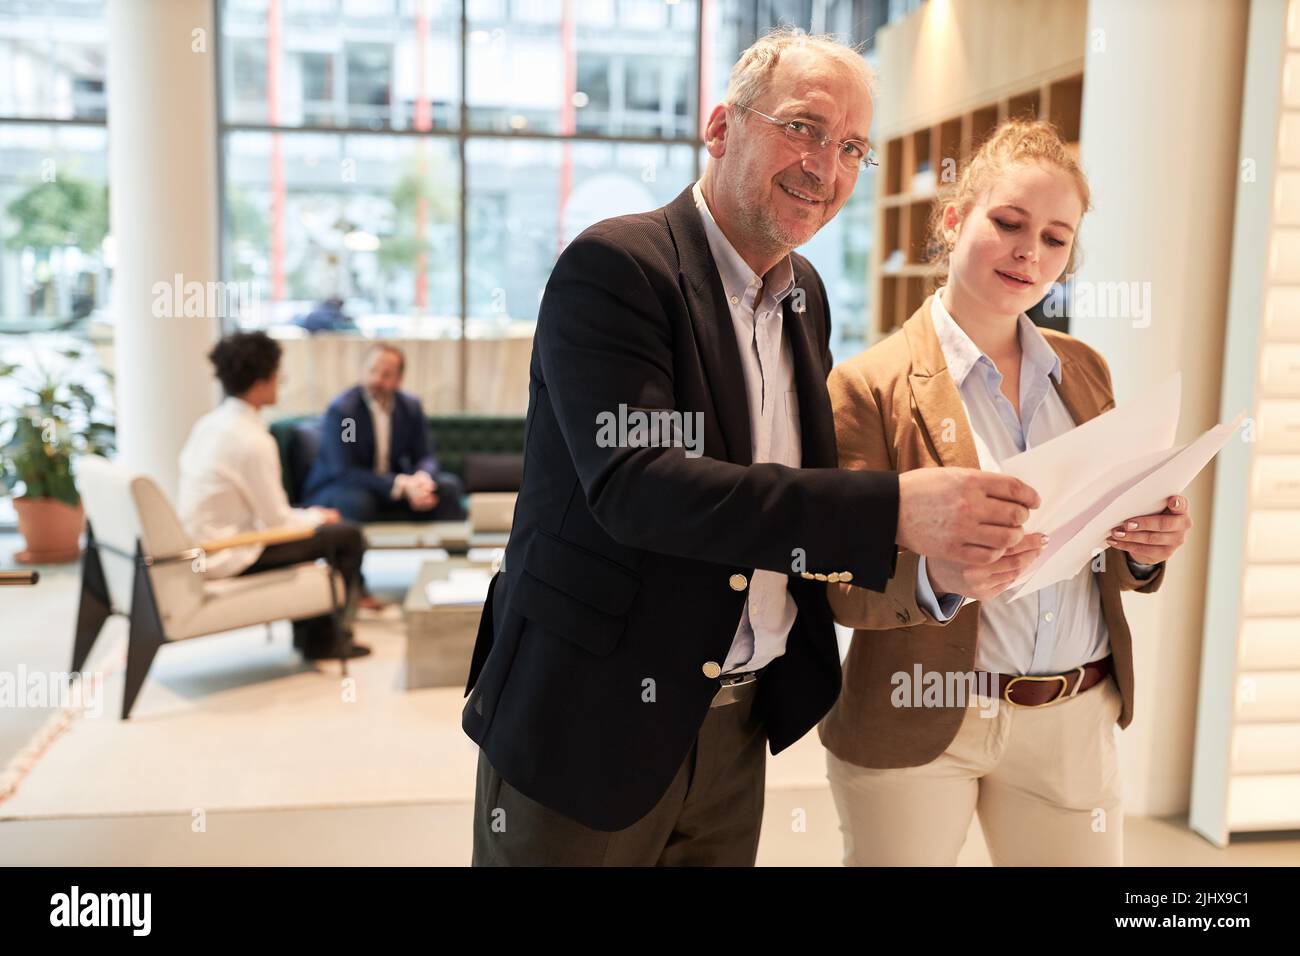 Senior businessman as trainer and young woman as trainee with business papers Stock Photo